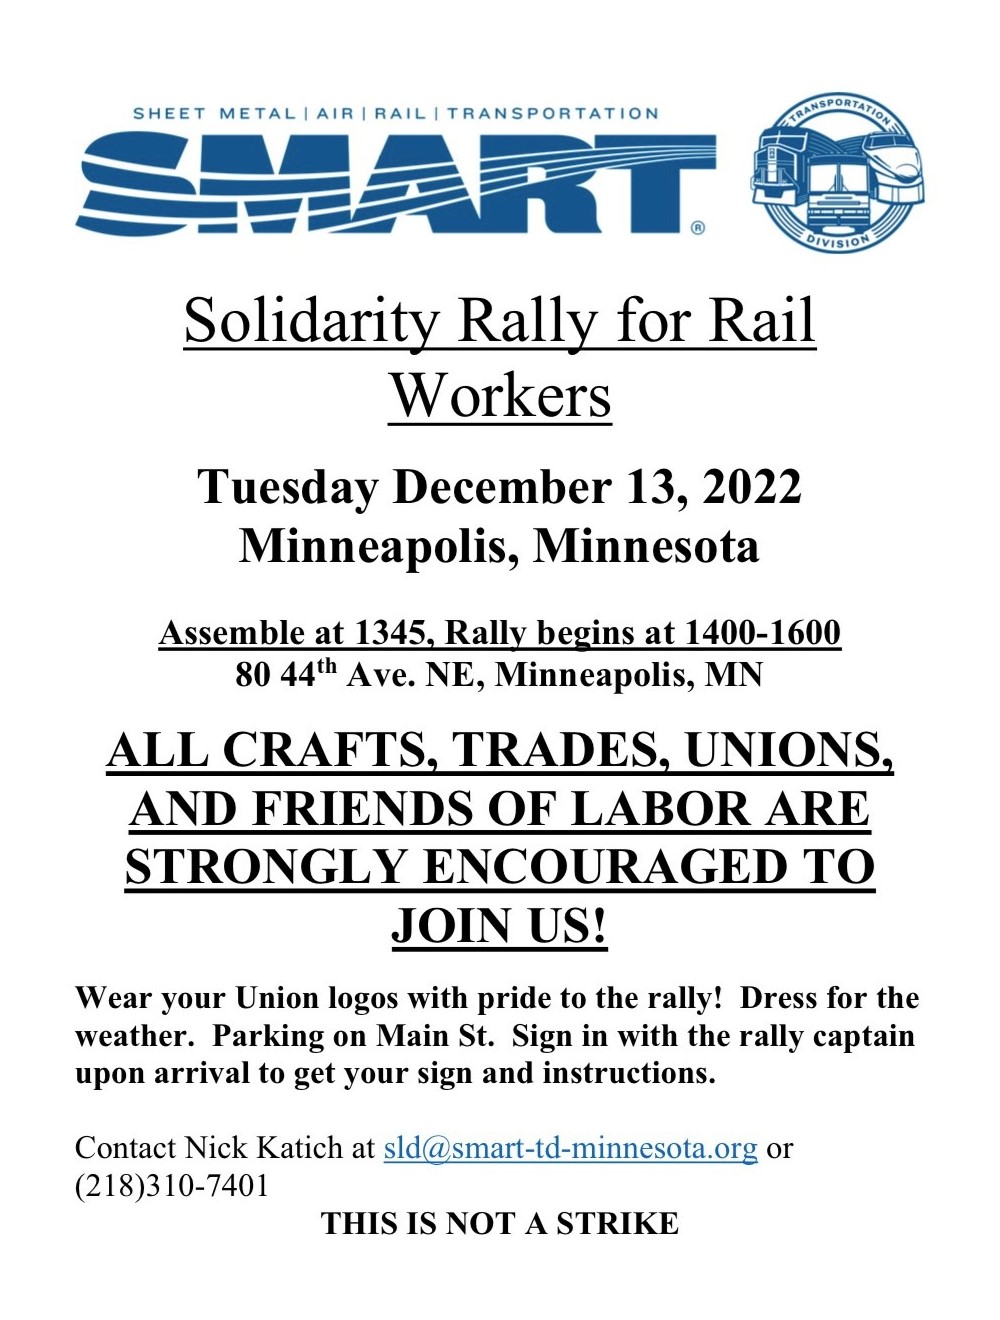 Solidarity Rally for Rail Workers